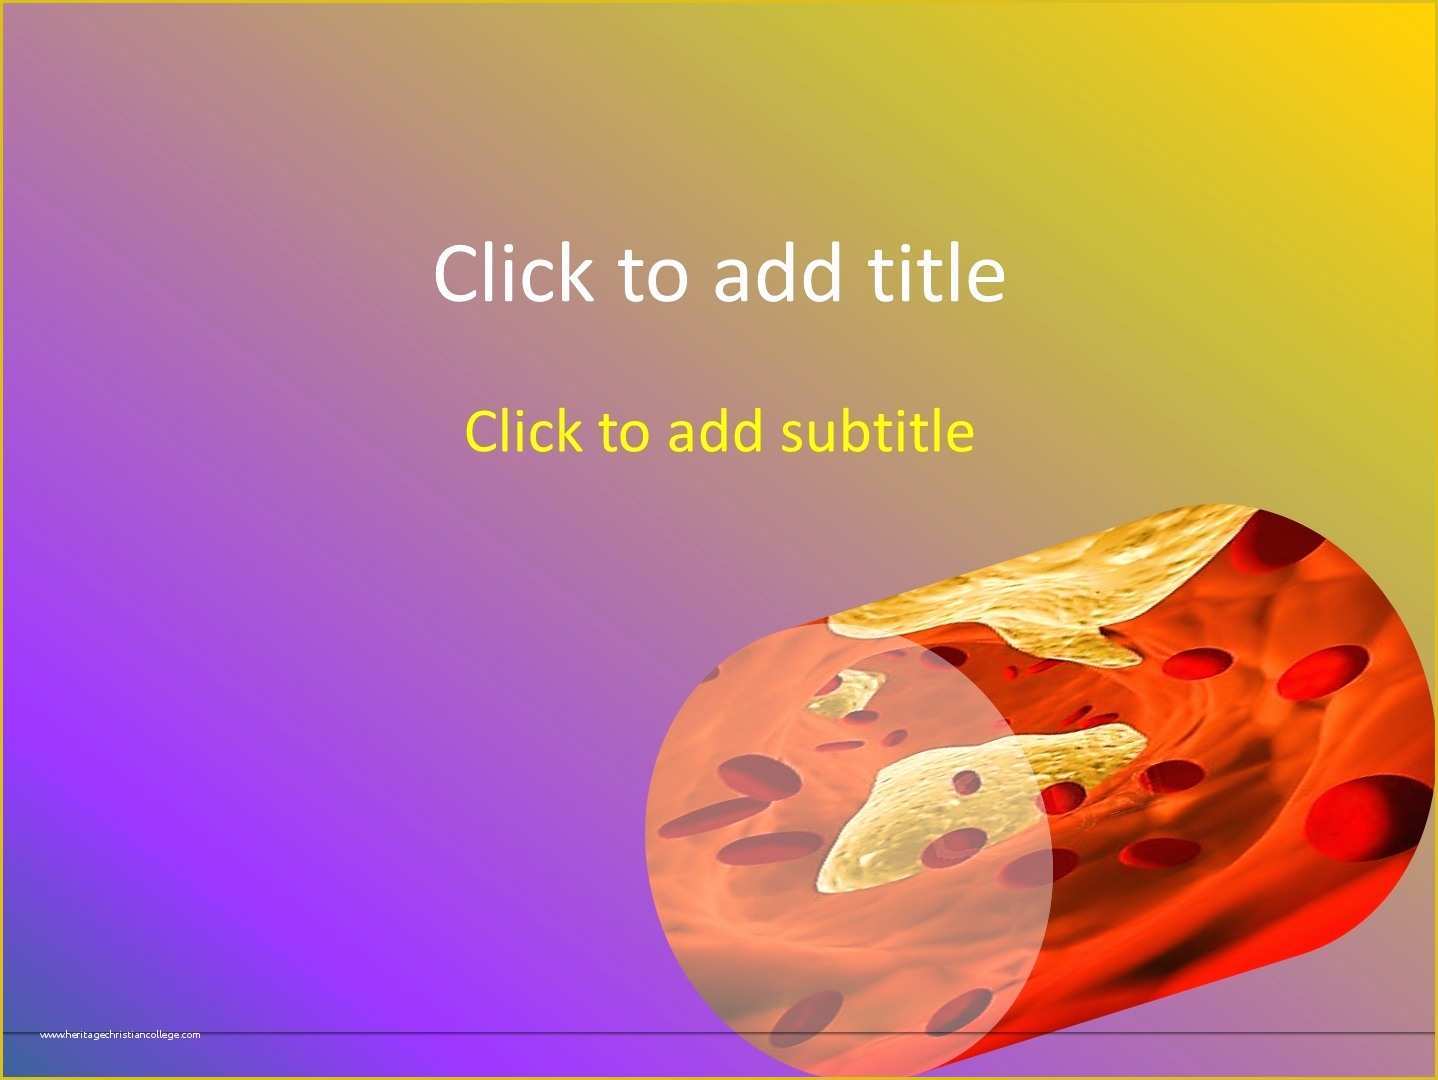 Free Animated Medical Ppt Templates Of atherosclerosis Animated Medical Powerpoint Template